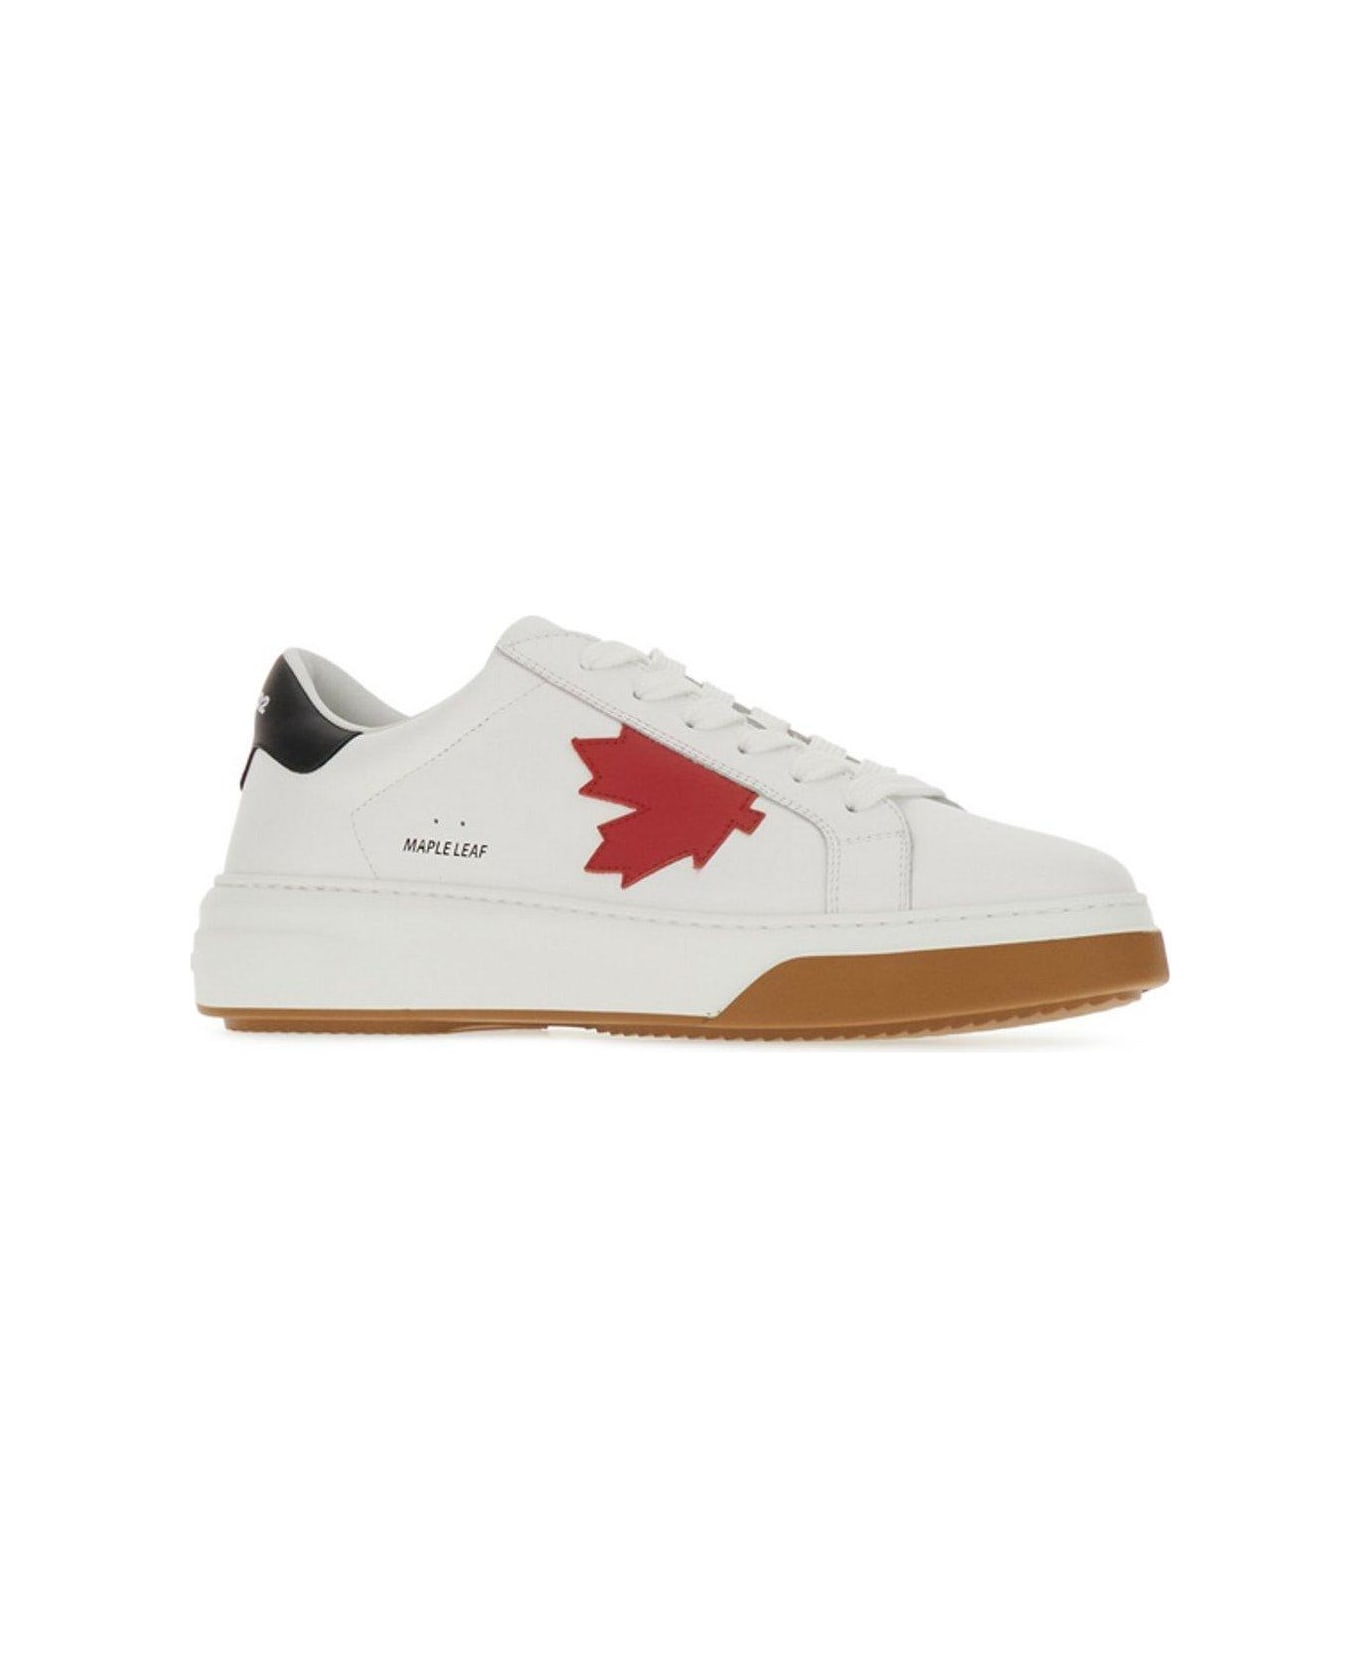 Dsquared2 Bumper Round Toe Lace-up Sneakers - Bianco